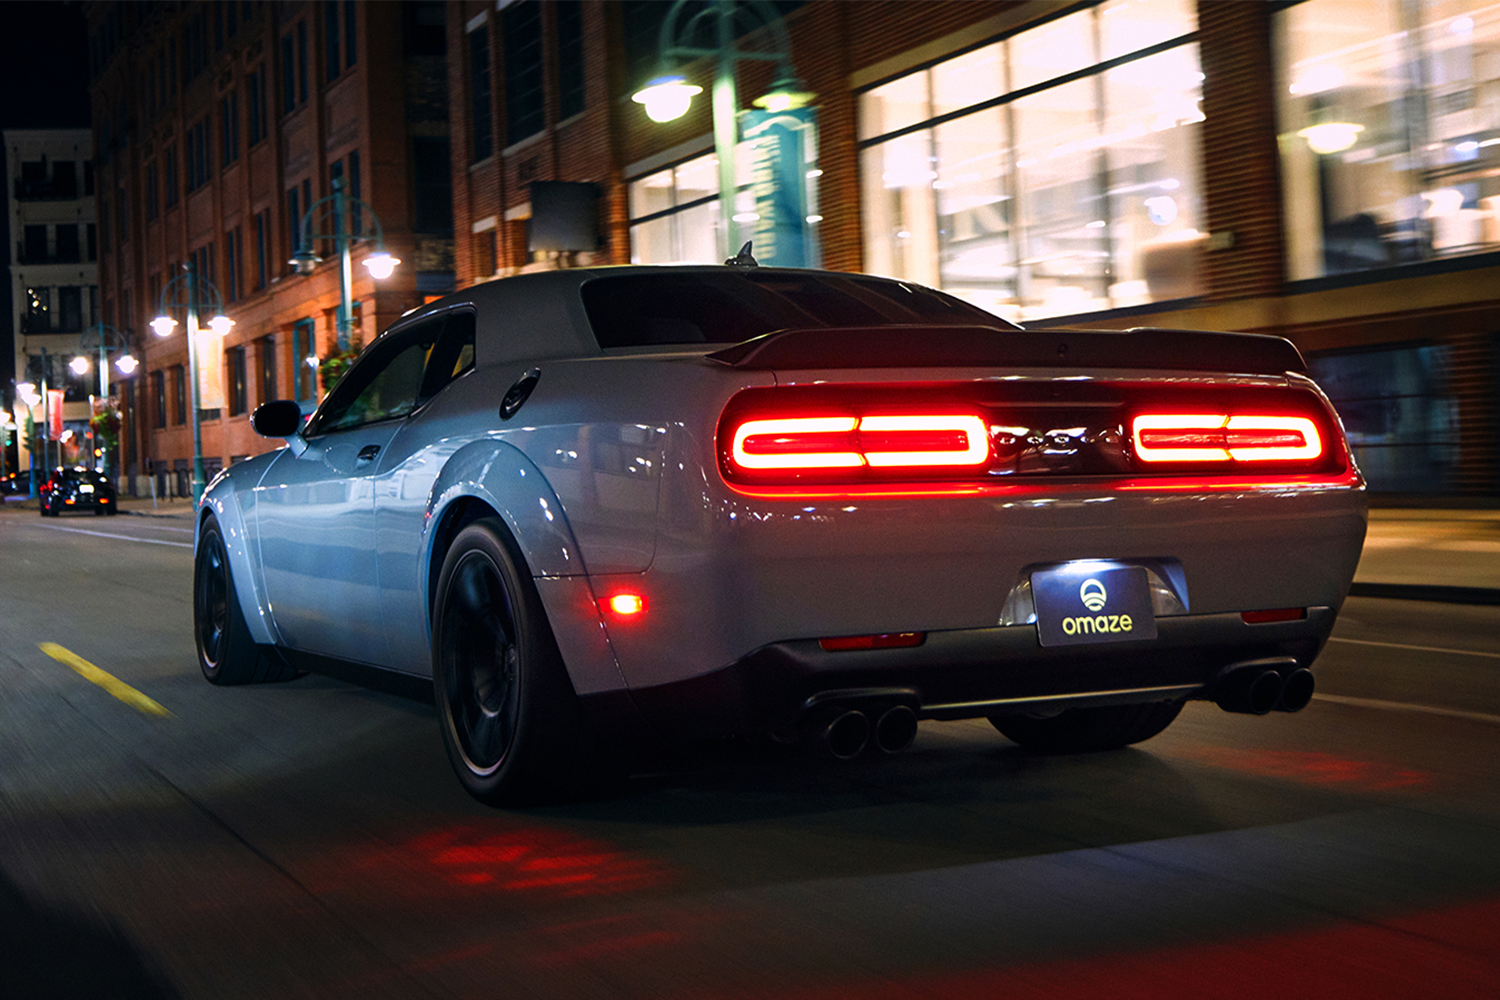 The rear end of a Dodge Demon, one that's being given away by Omaze, shown on the road at night